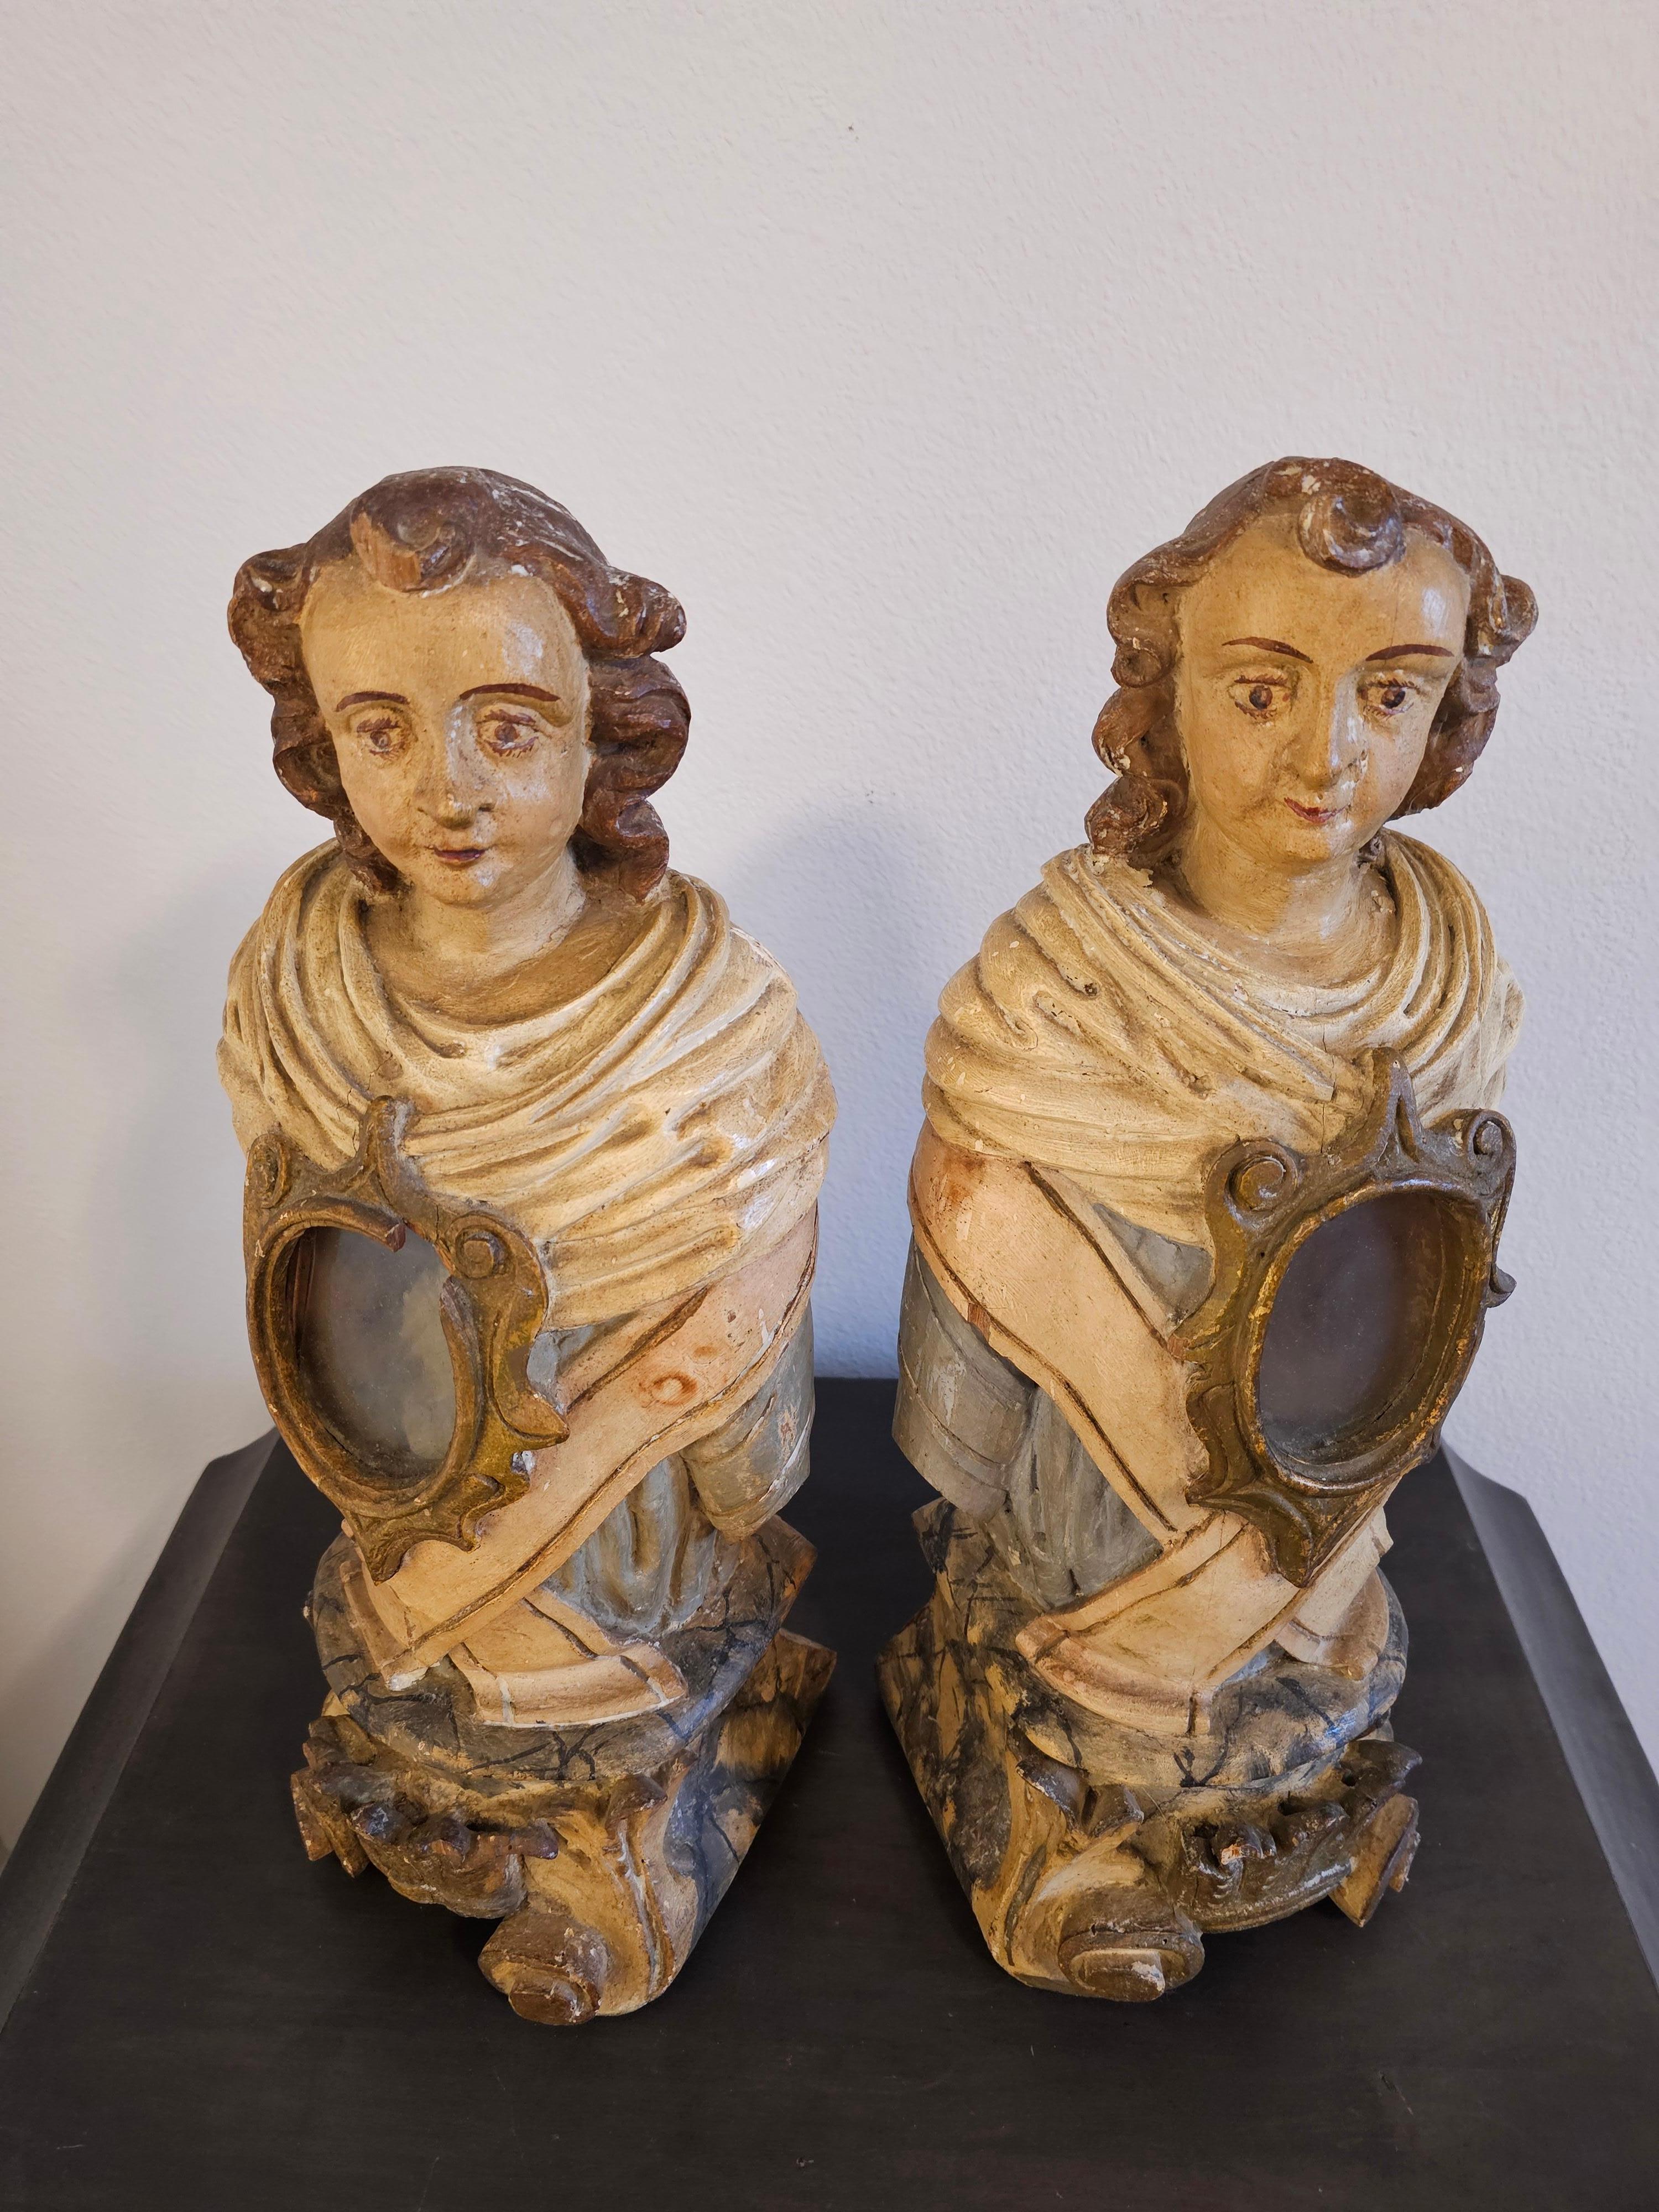 A remarkable pair of scarce large Italian Baroque period carved and painted wood church altar reliquary busts.

Born in Italy in the 18th century / possibly late 17th century, figural form, each hand carved from a single log, modeled as opposing